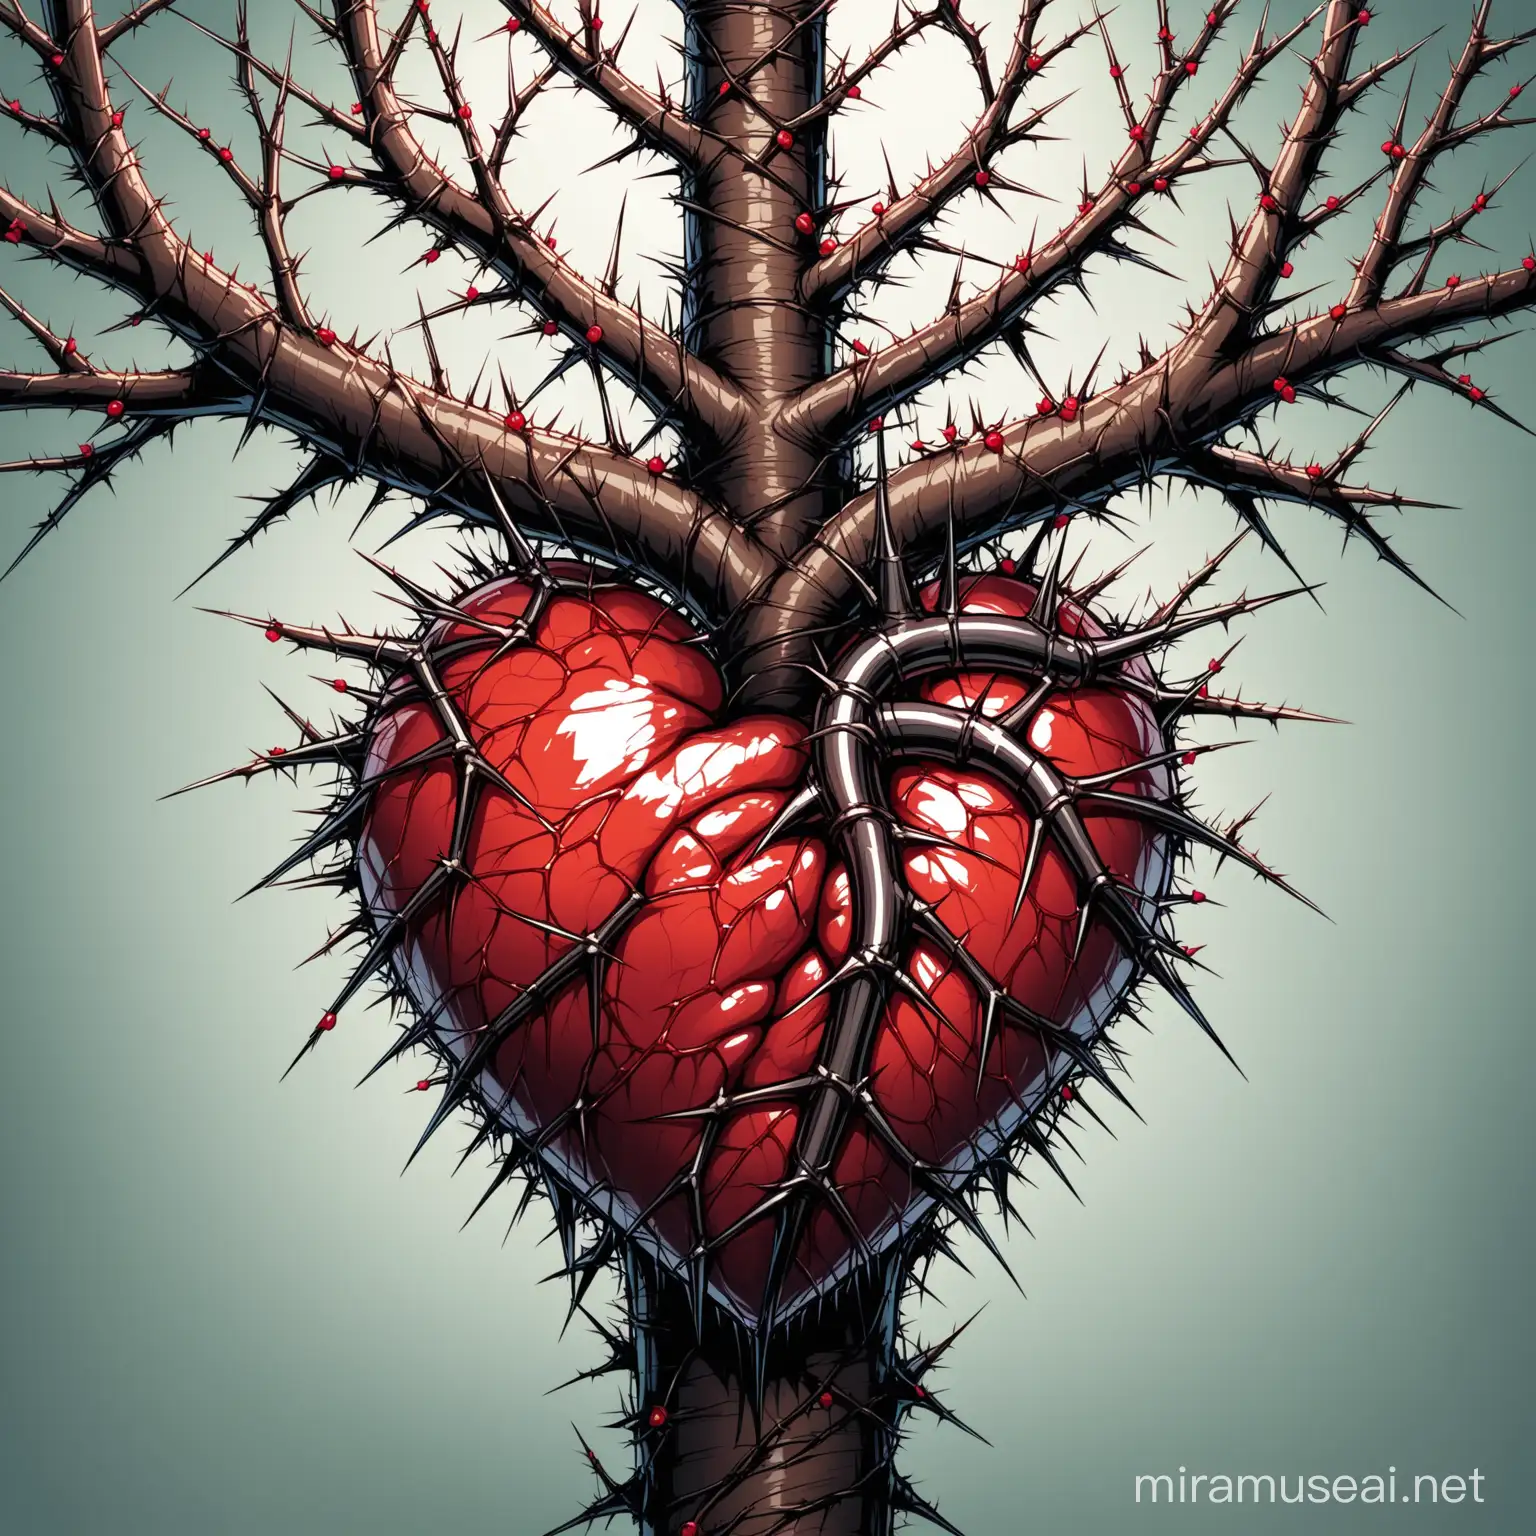 Heart with Thorns on Tree Branch